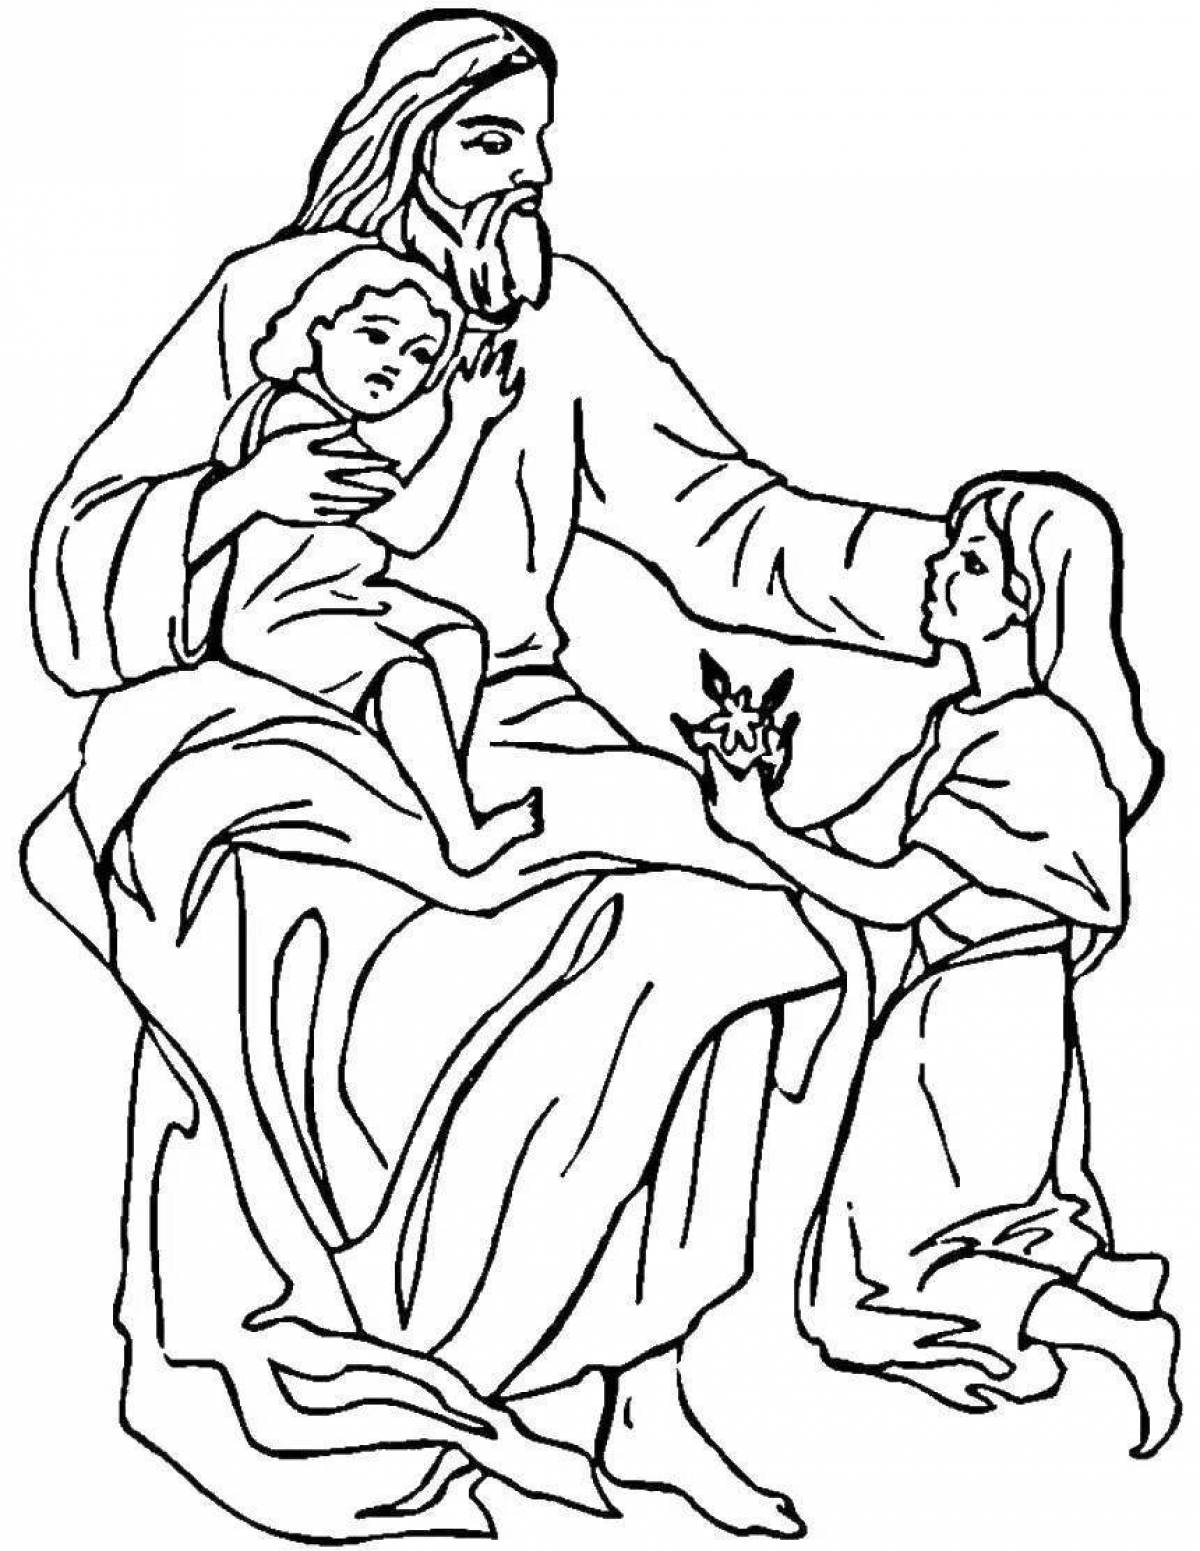 Amazing Jesus coloring book for kids